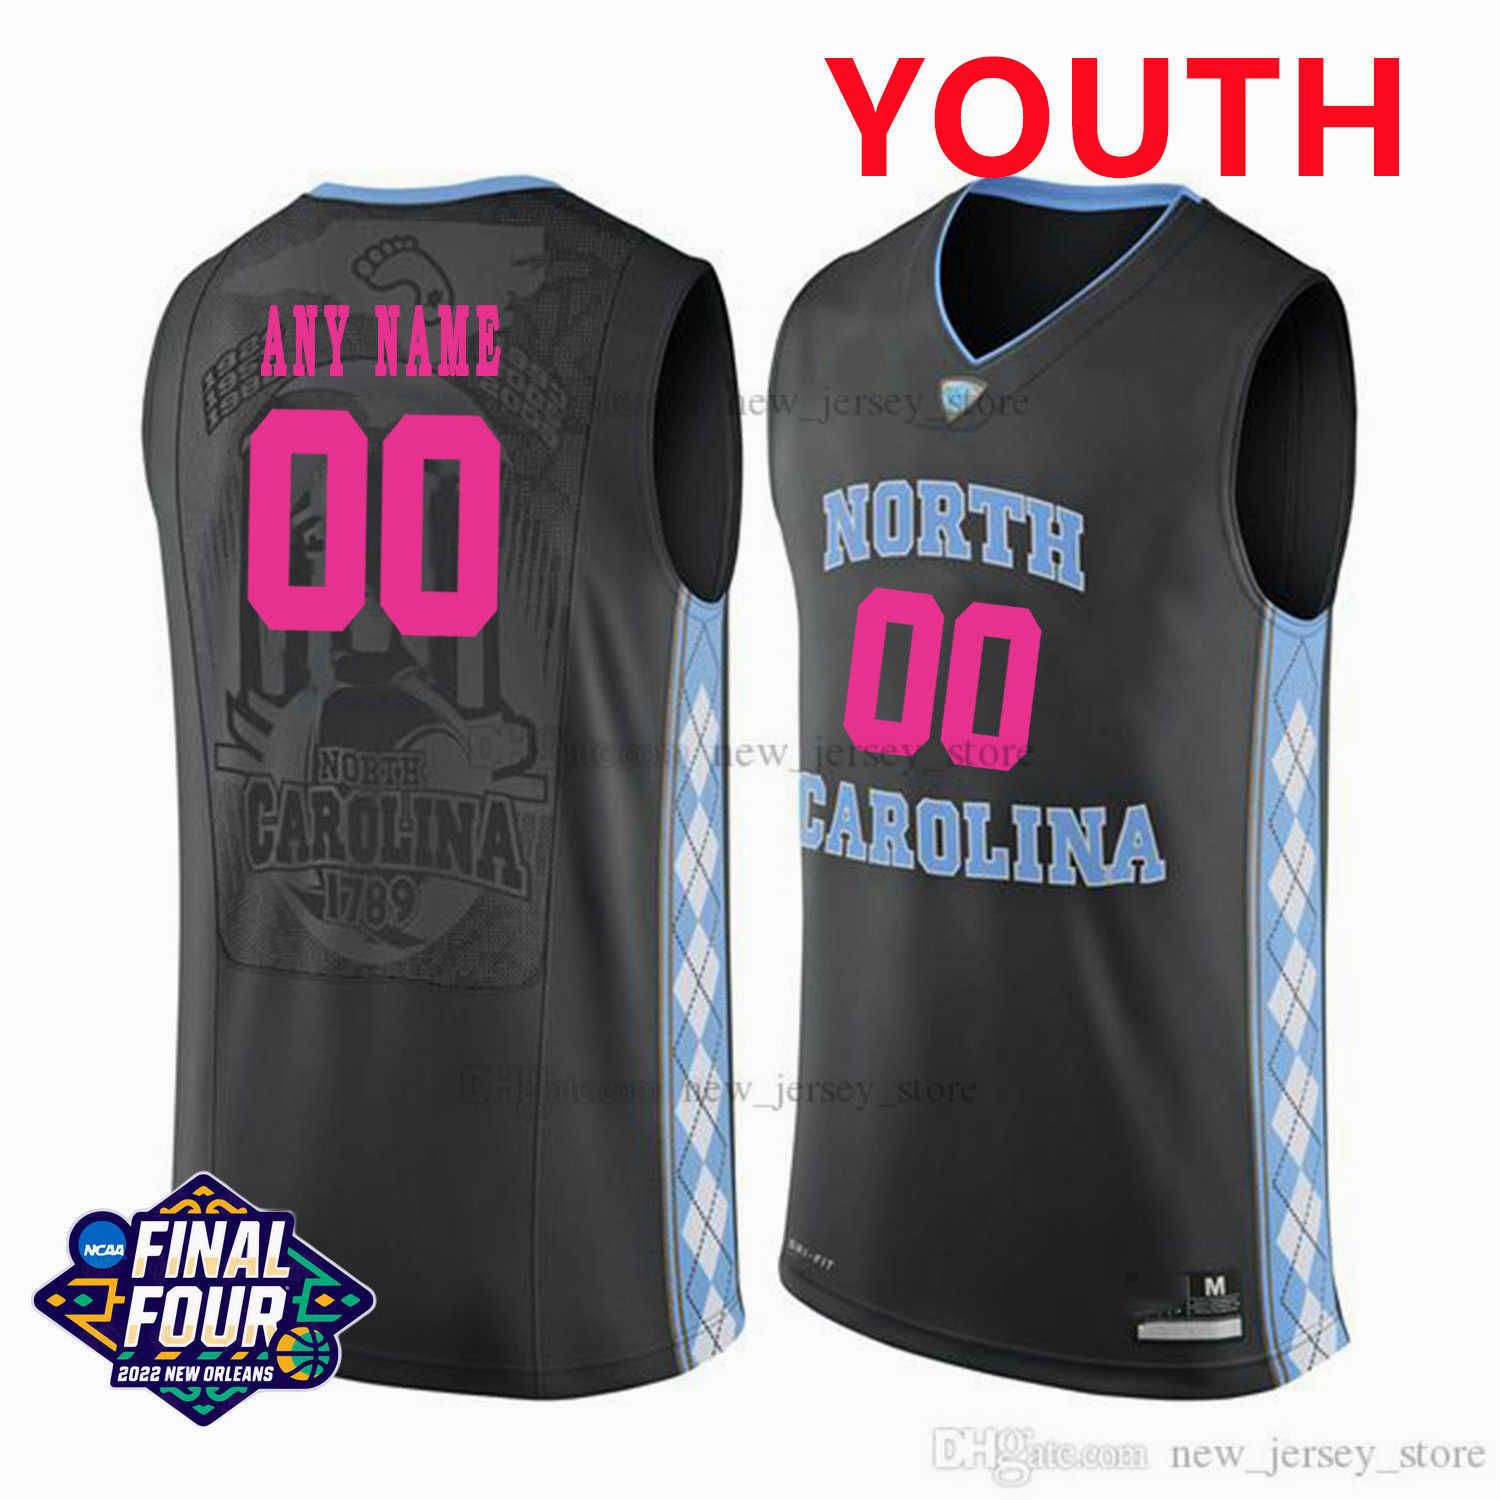 Youth Size_1